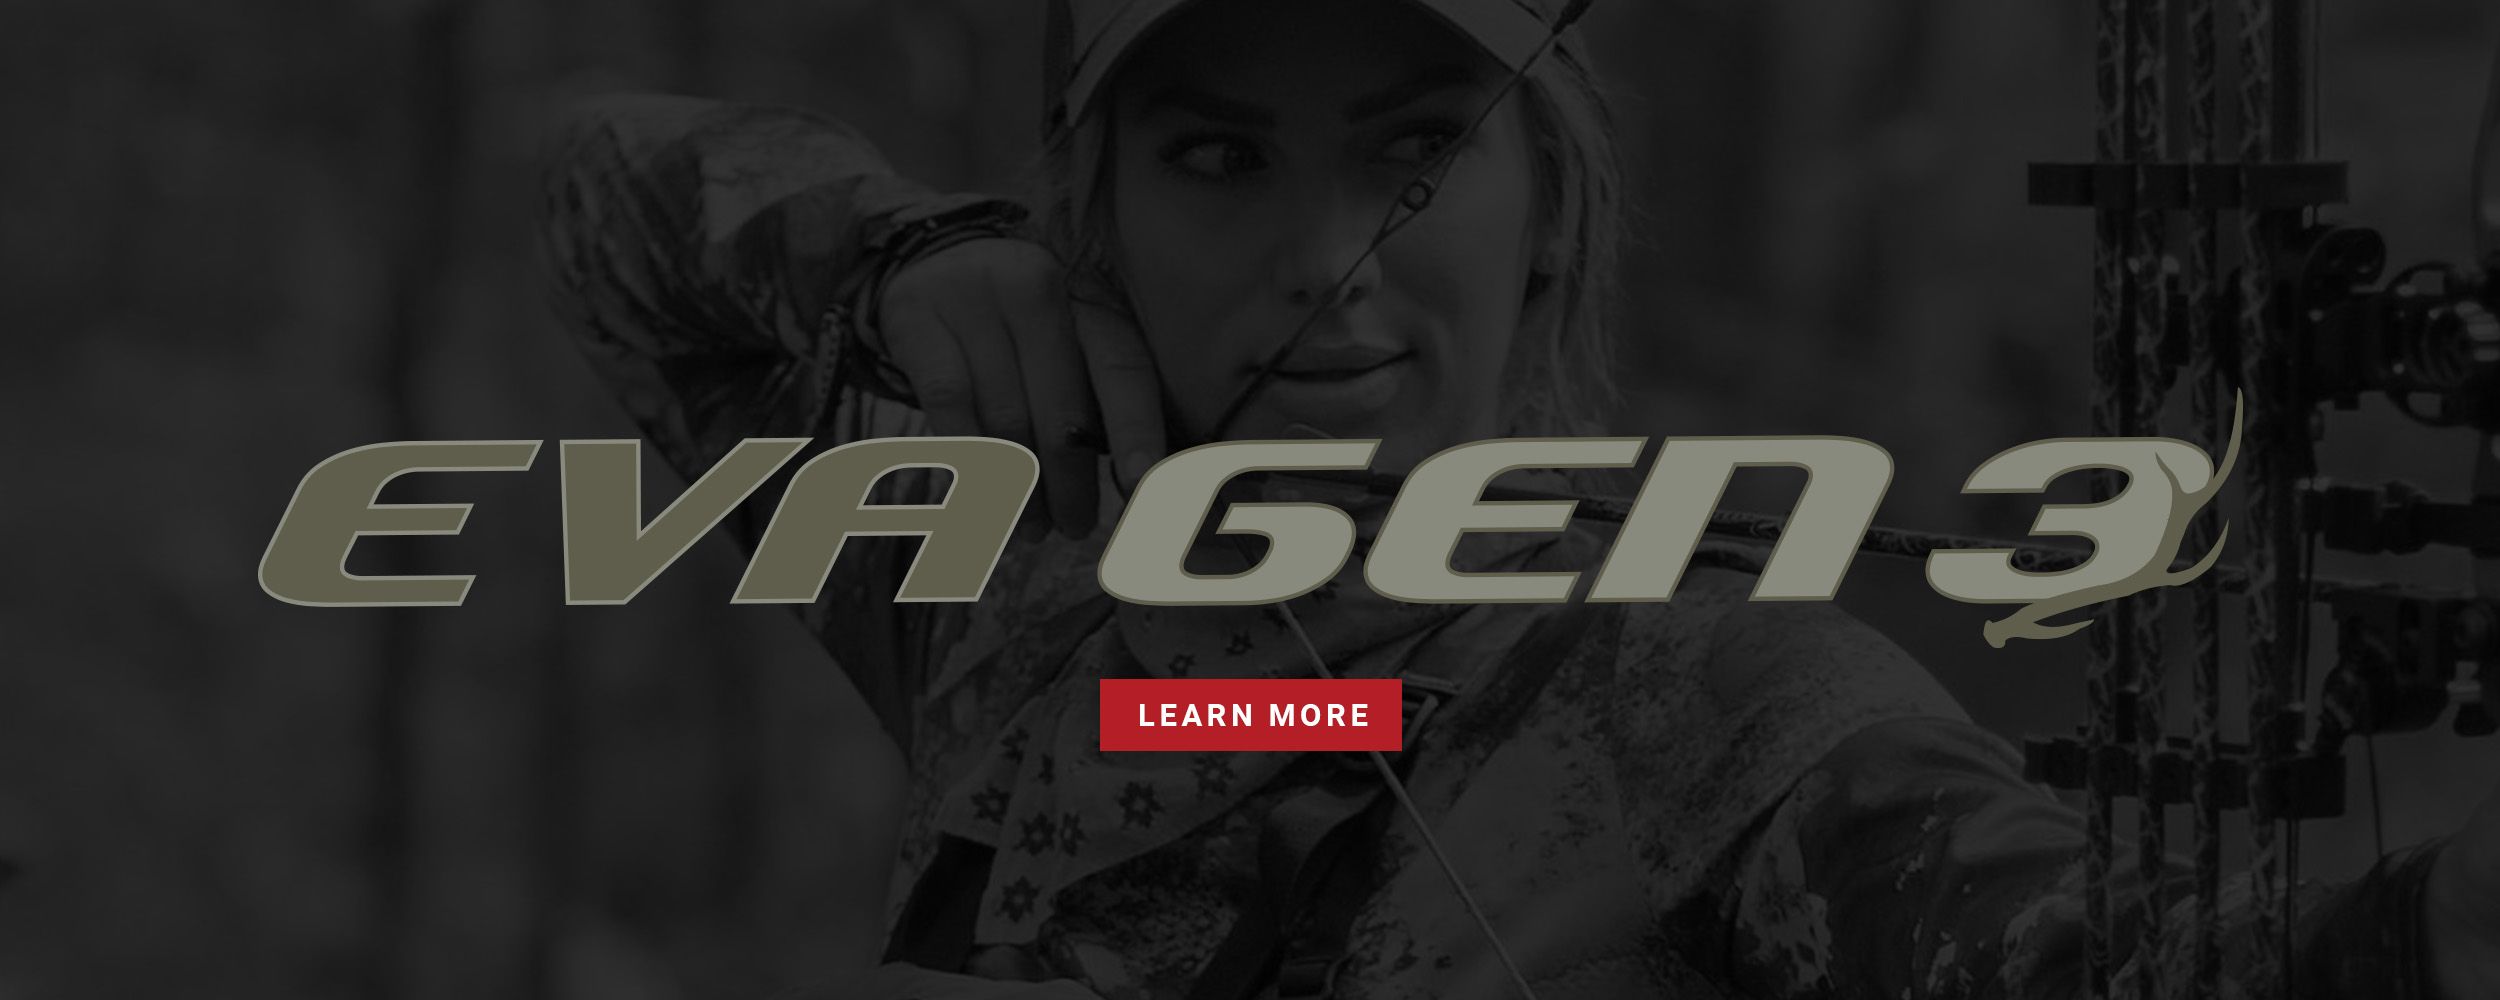 eva gen 3 banner with learn more button